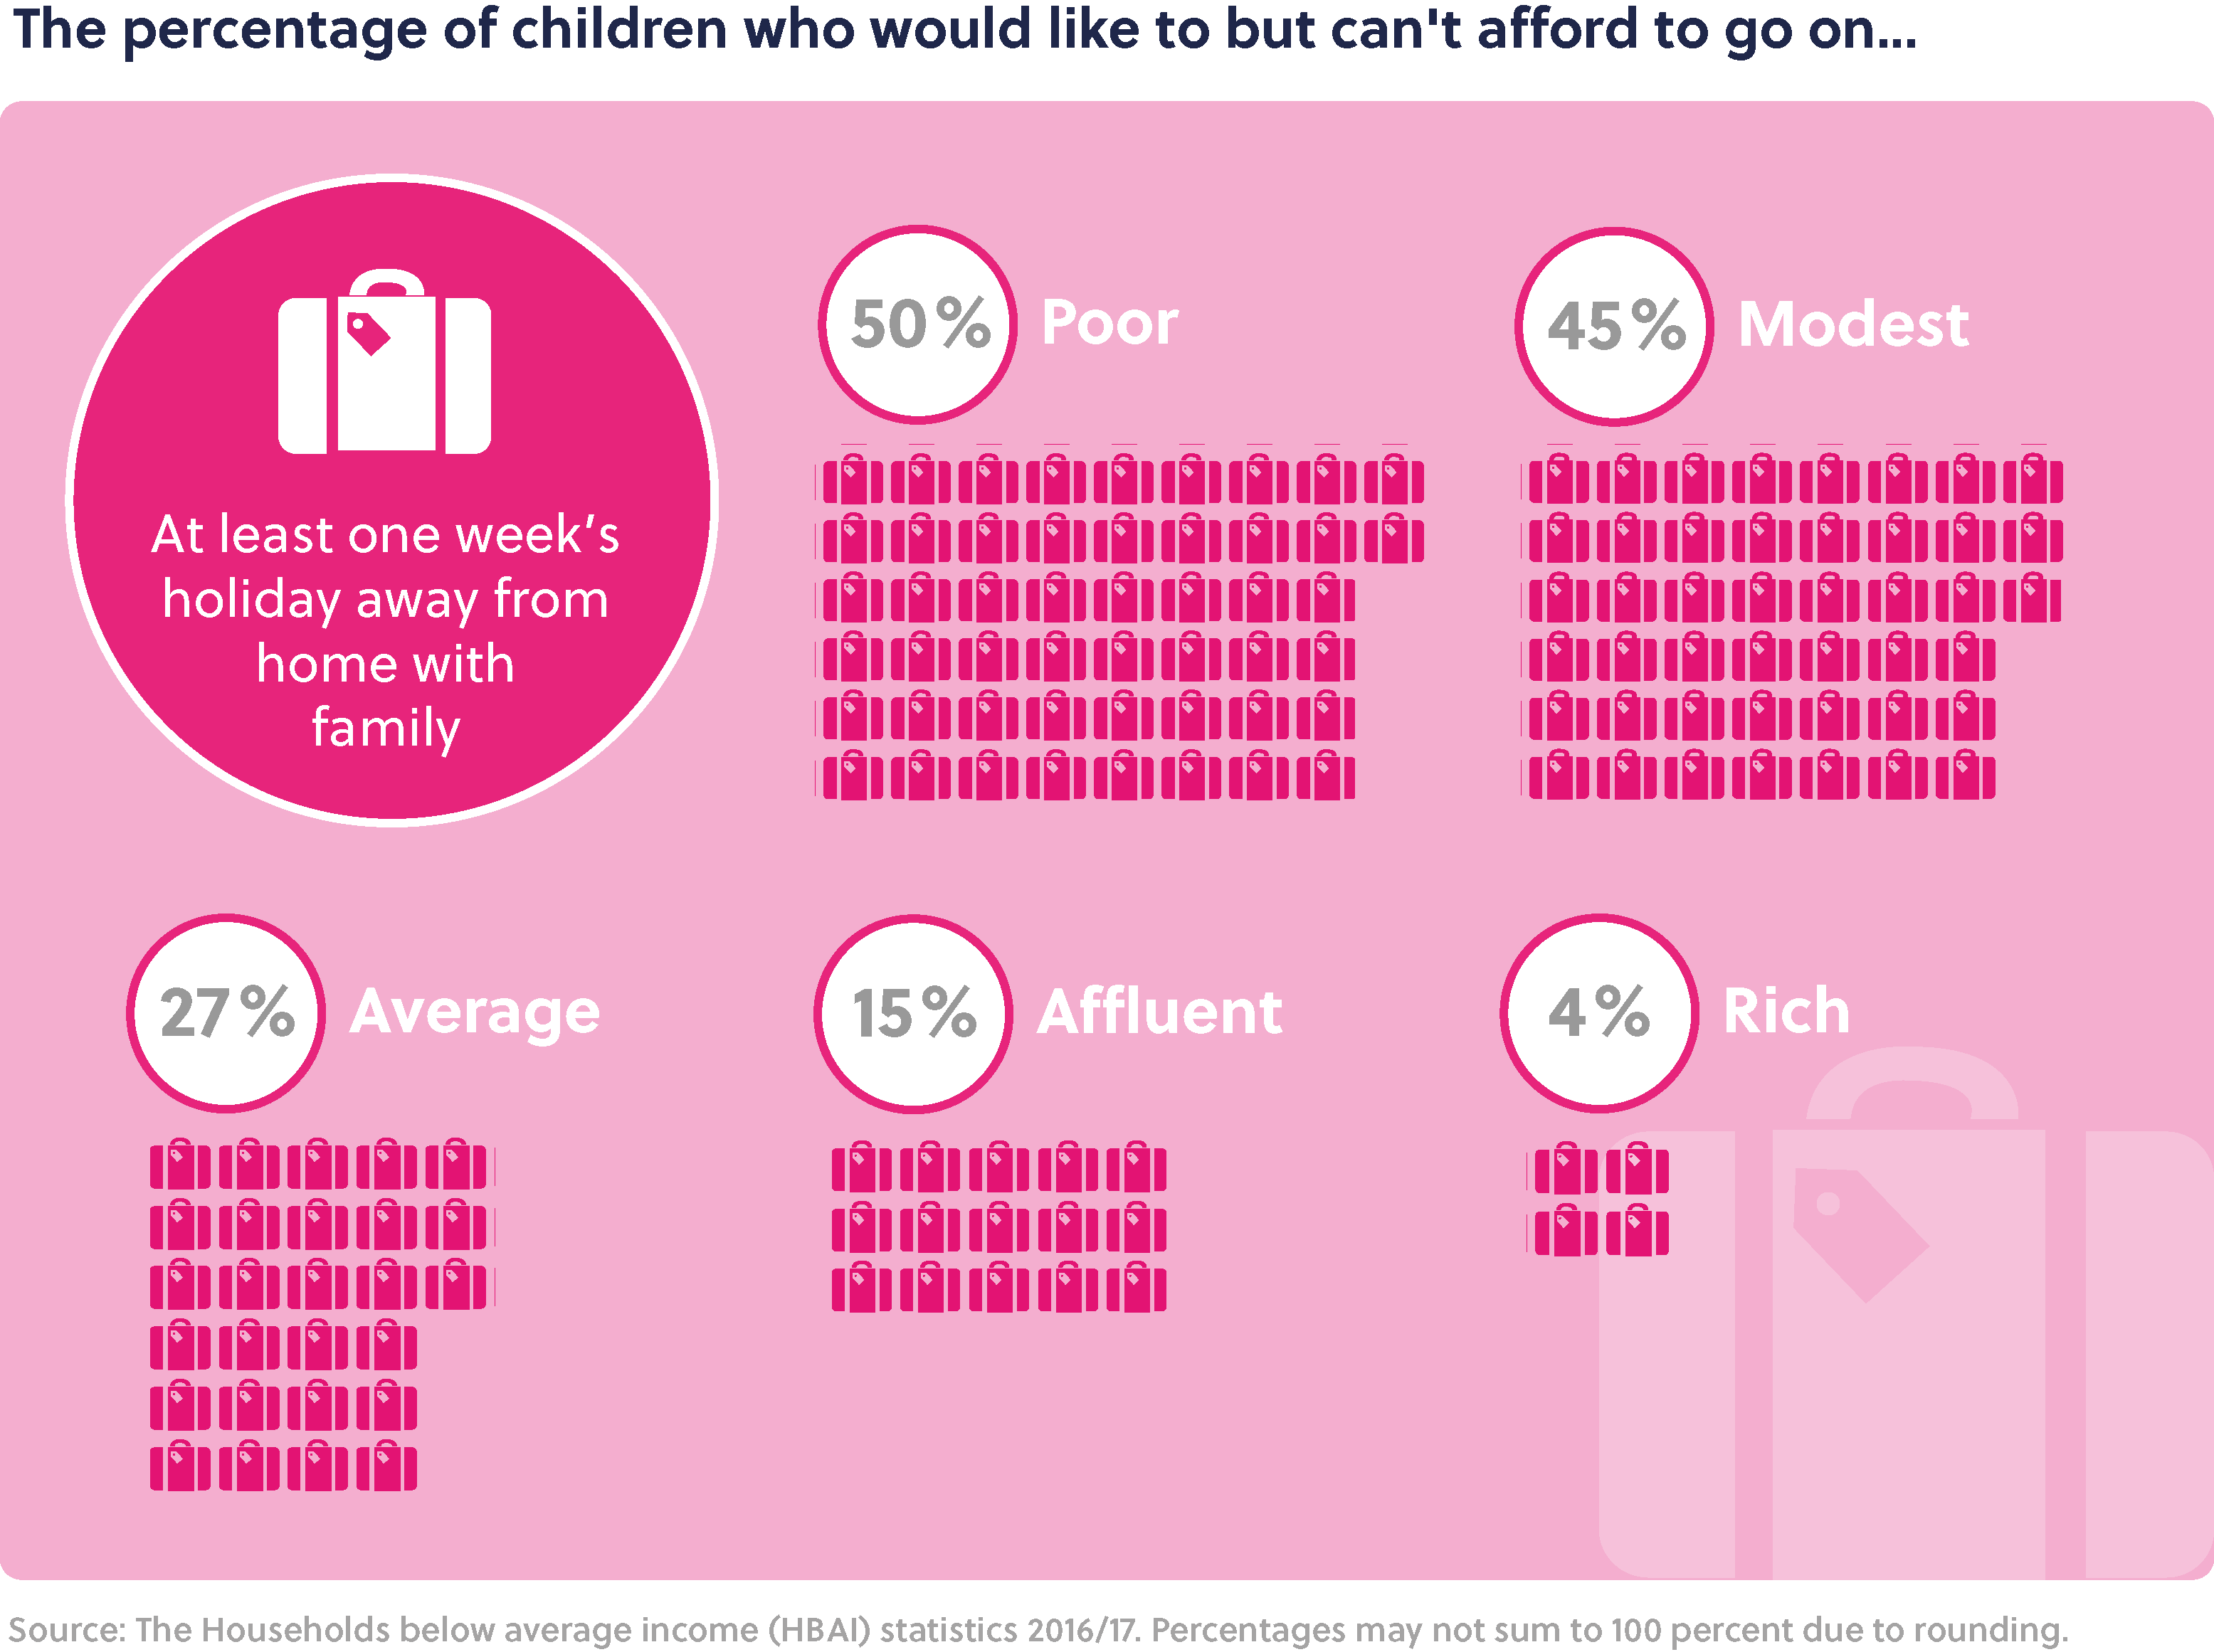 Main title: The percentage of children who would like to but can't afford to go on... Sub-heading: At least one week's holiday away from home with family. Poor: 50%, Modest: 45%, Average: 27%, Affluent: 15%, and Rich: 4%.  Source: The Households below average income (HBAI) statistics 2016/17. Percentages may not sum to 100 percent due to rounding.  